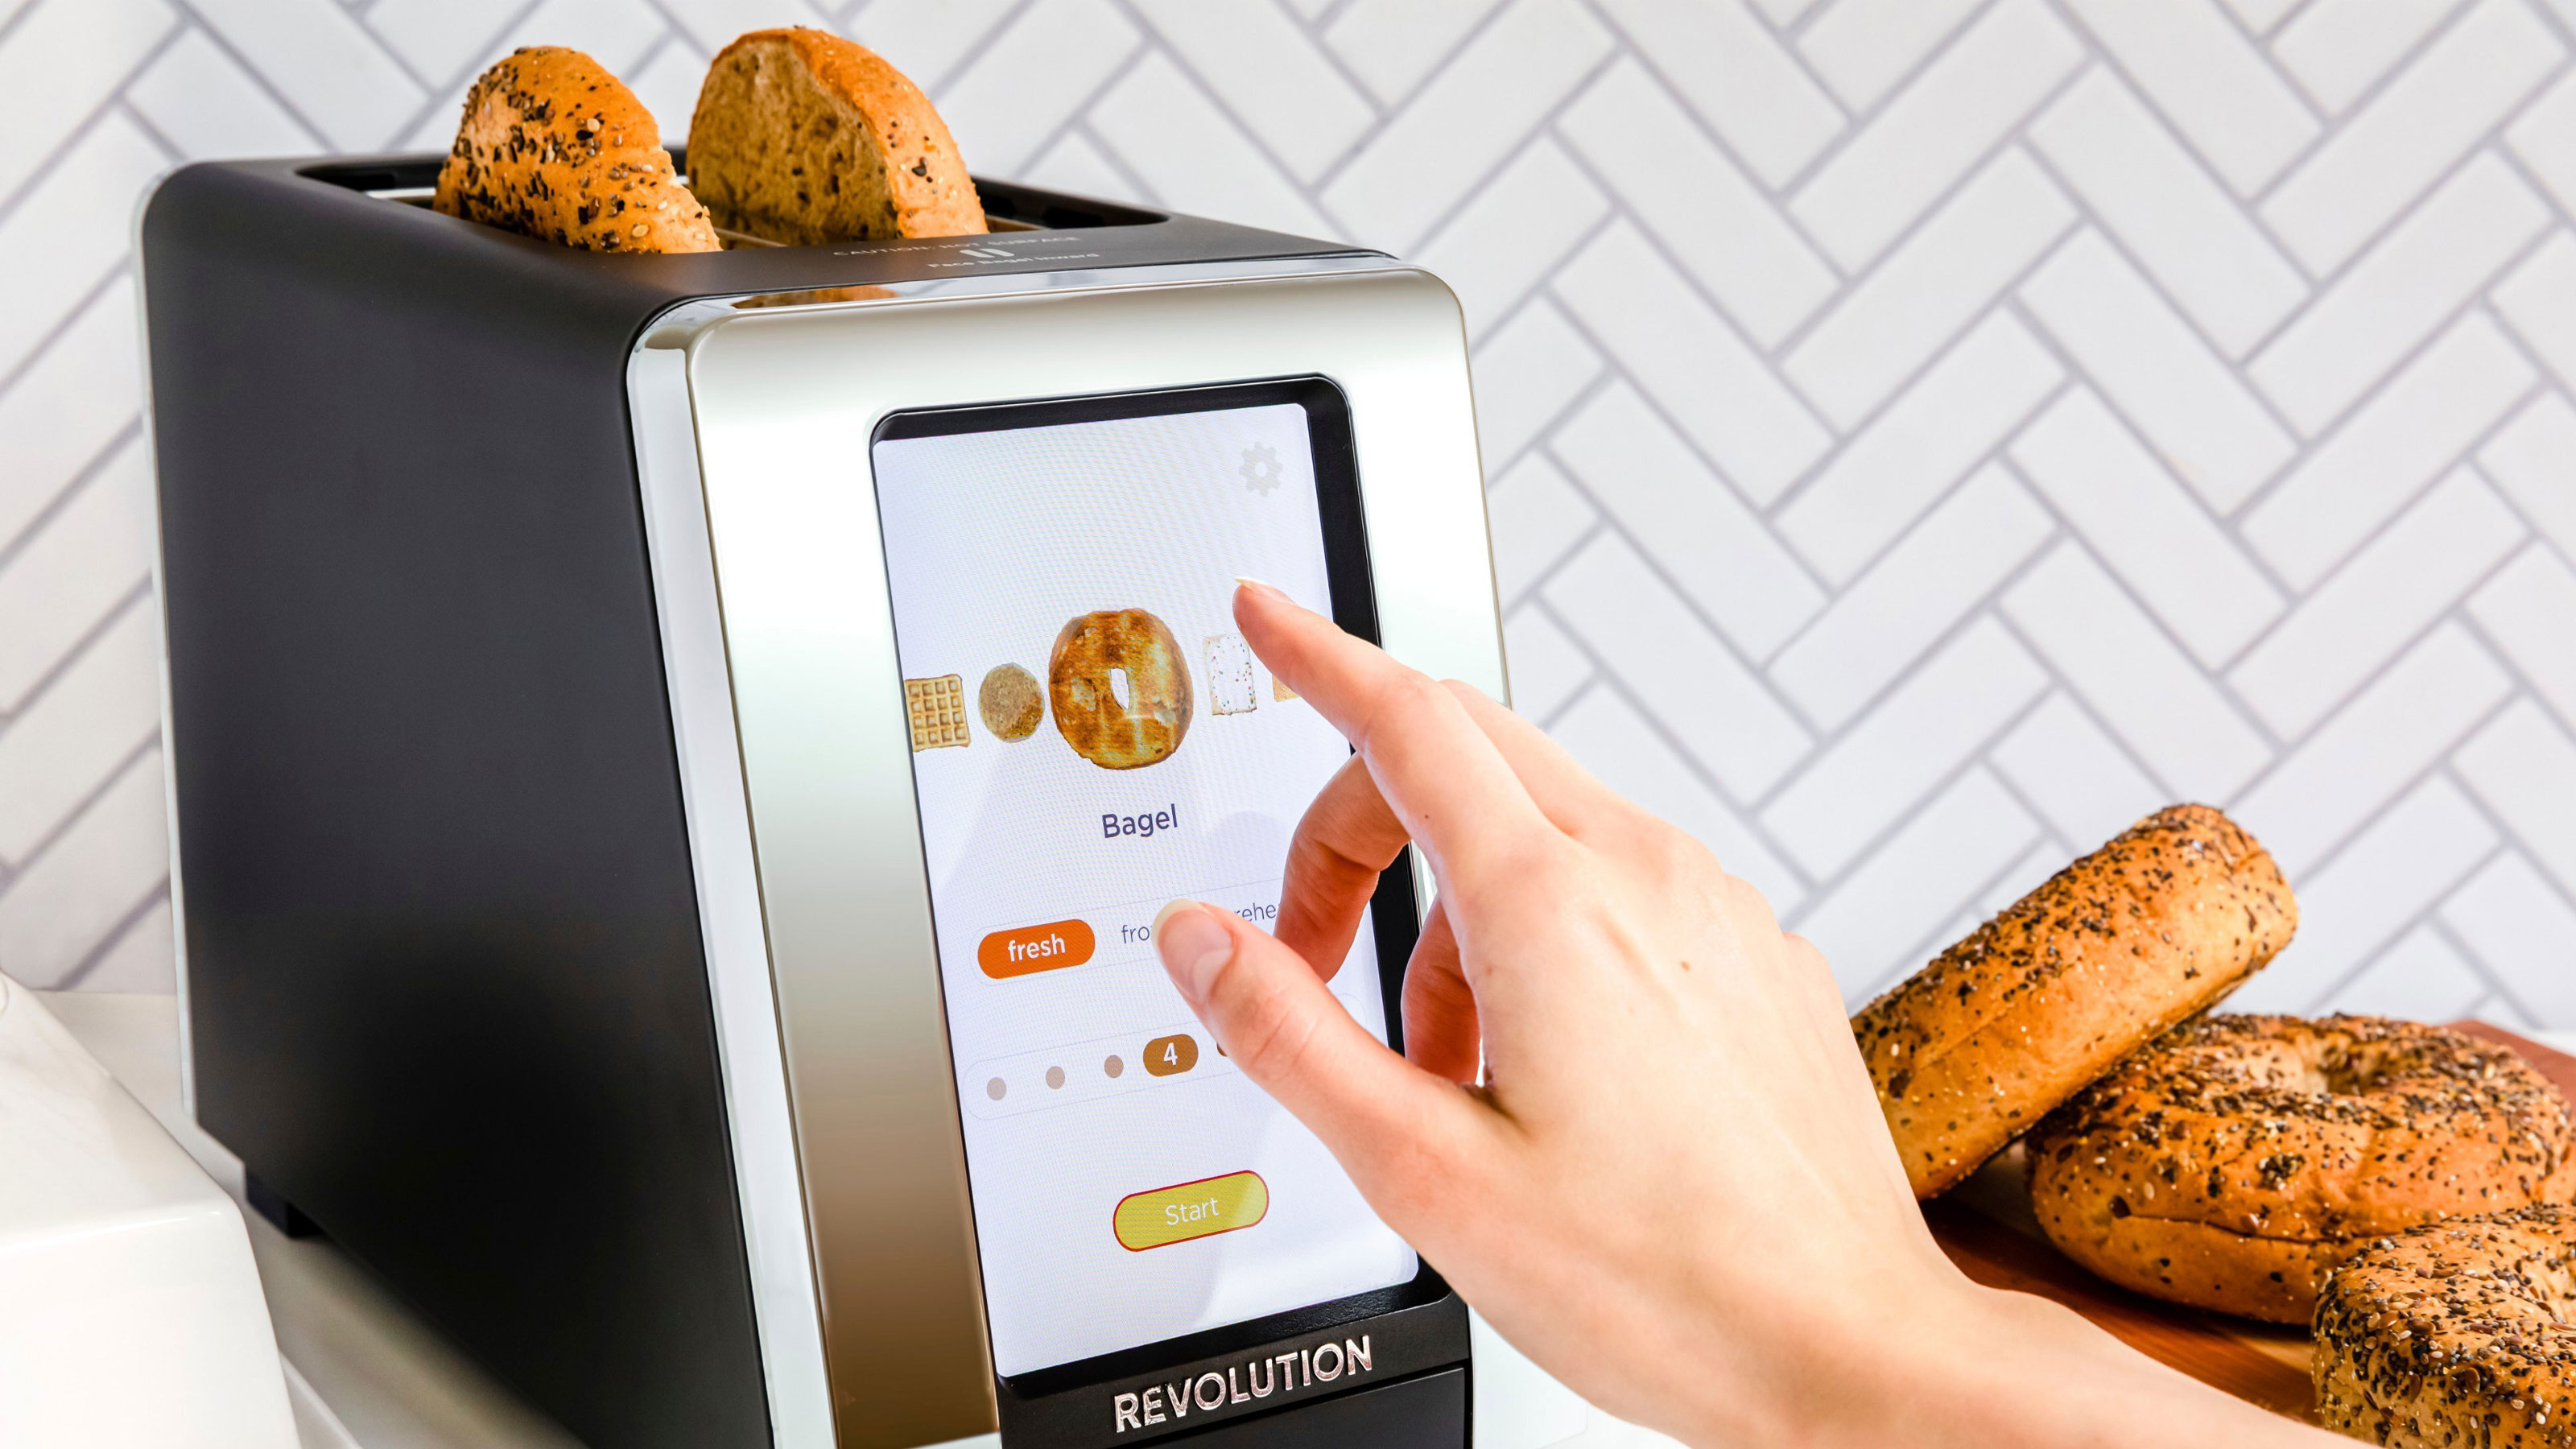 Look no further, the future of toasters is right in front of you